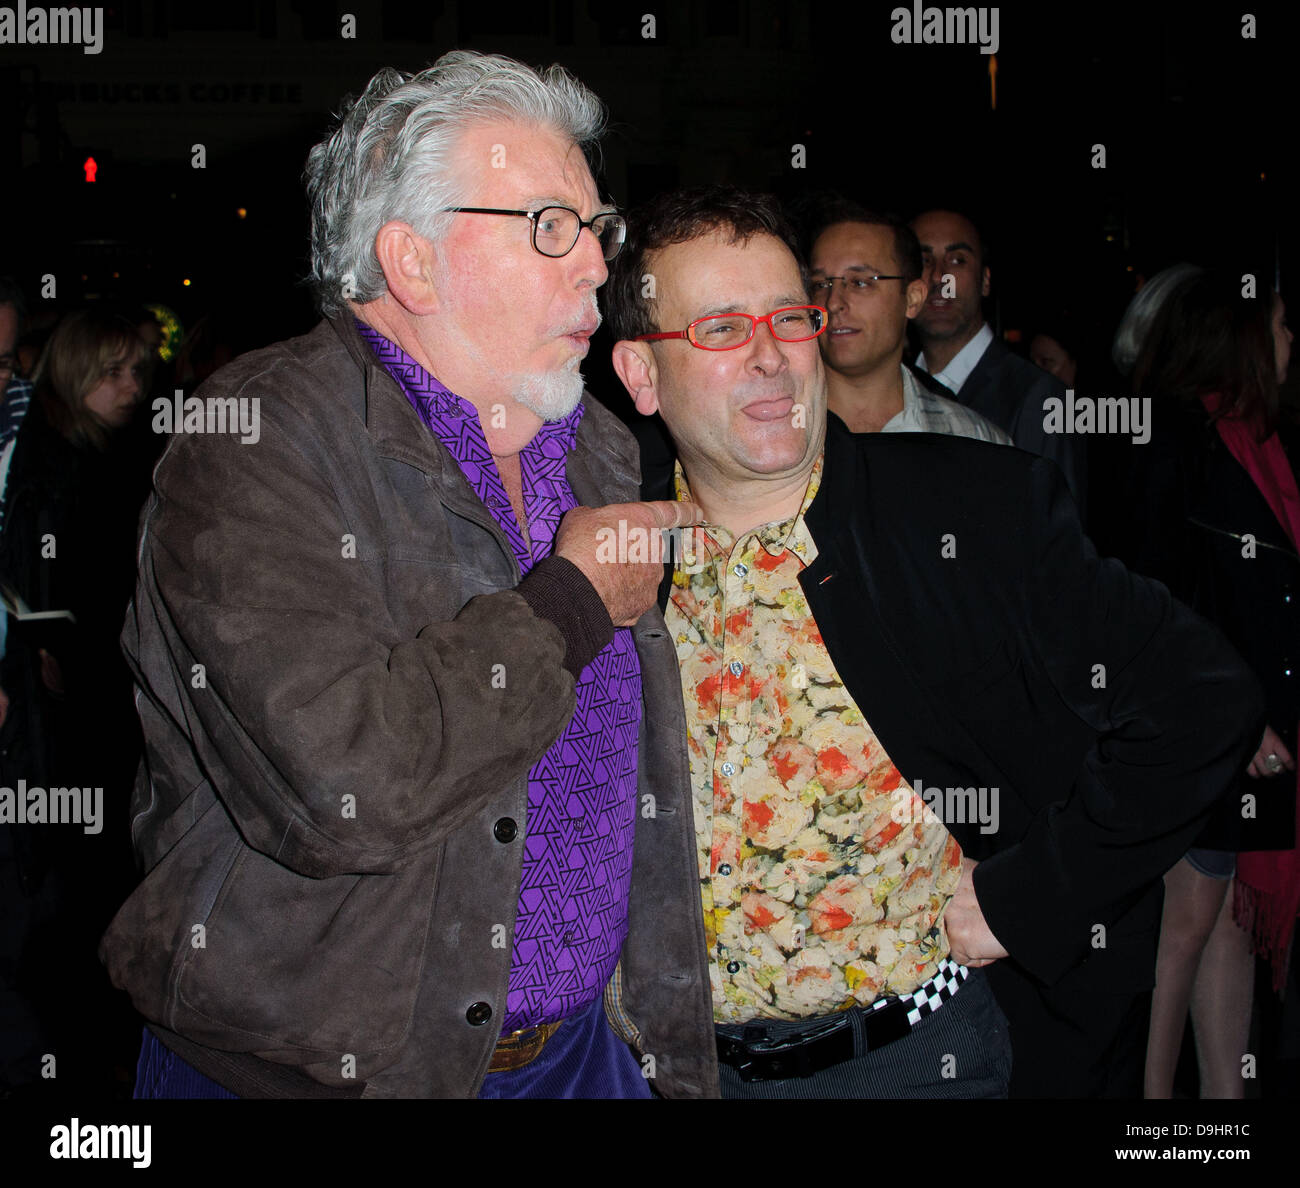 Rolf Harris and Timmy Mallet The Umbrellas of Cherbourg - Press night held at the Gielgud Theatre - Arrivals. London, England - 22.03.11 Stock Photo